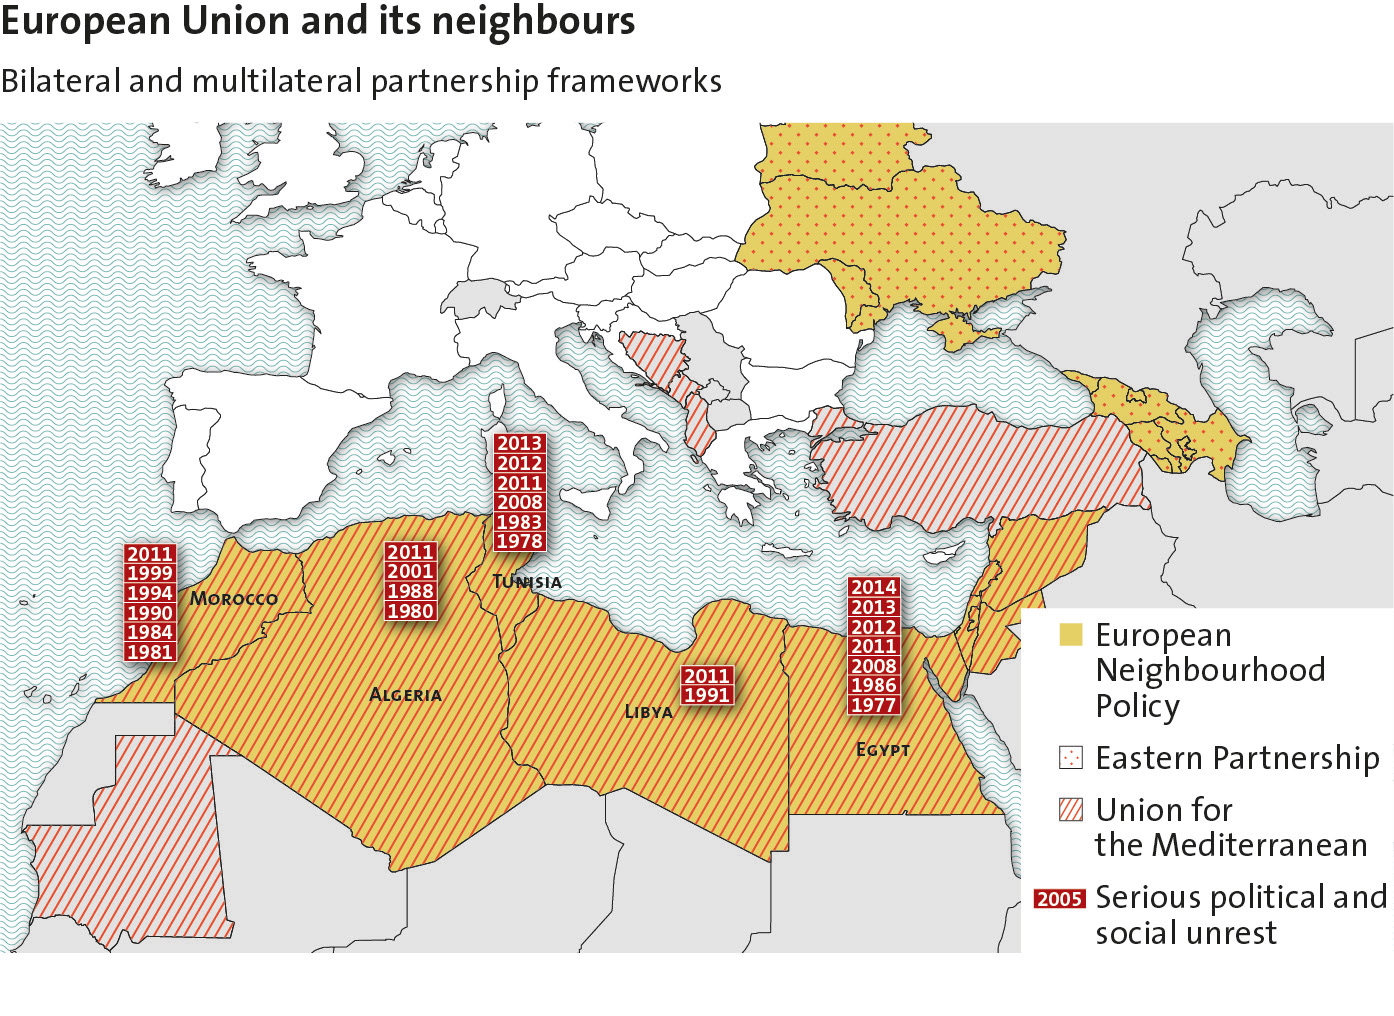 Enlarged view: The European Union and its neighbors.